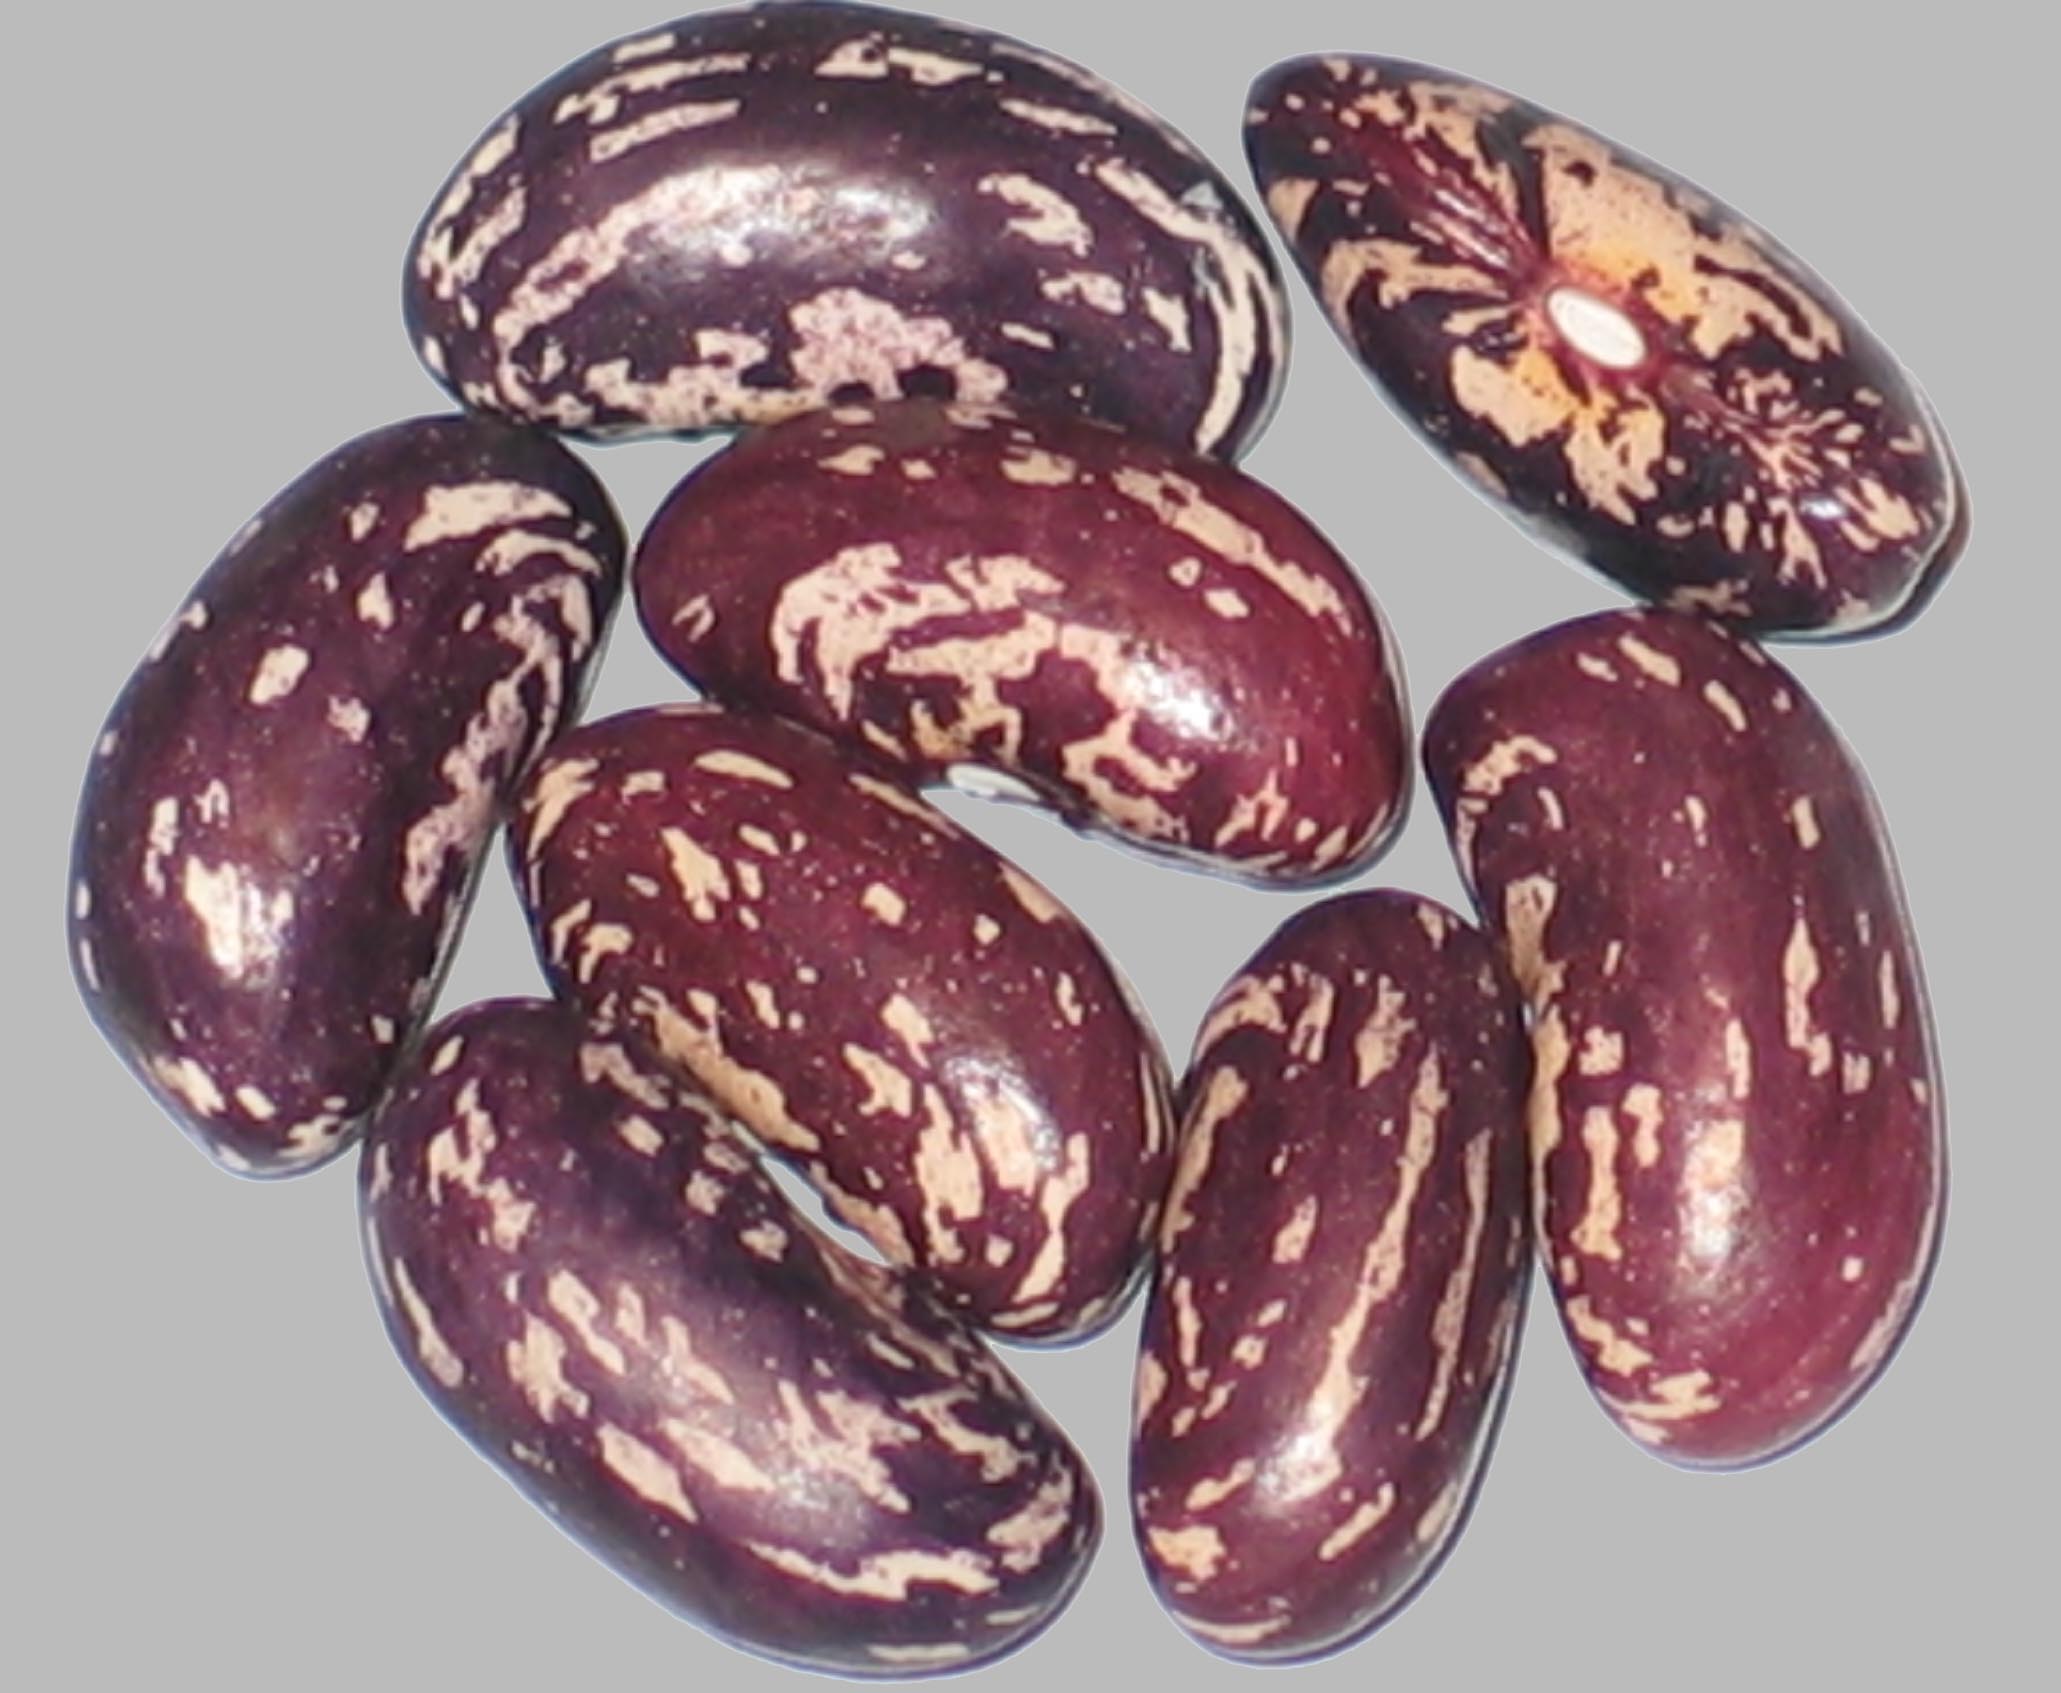 image of Railroad beans